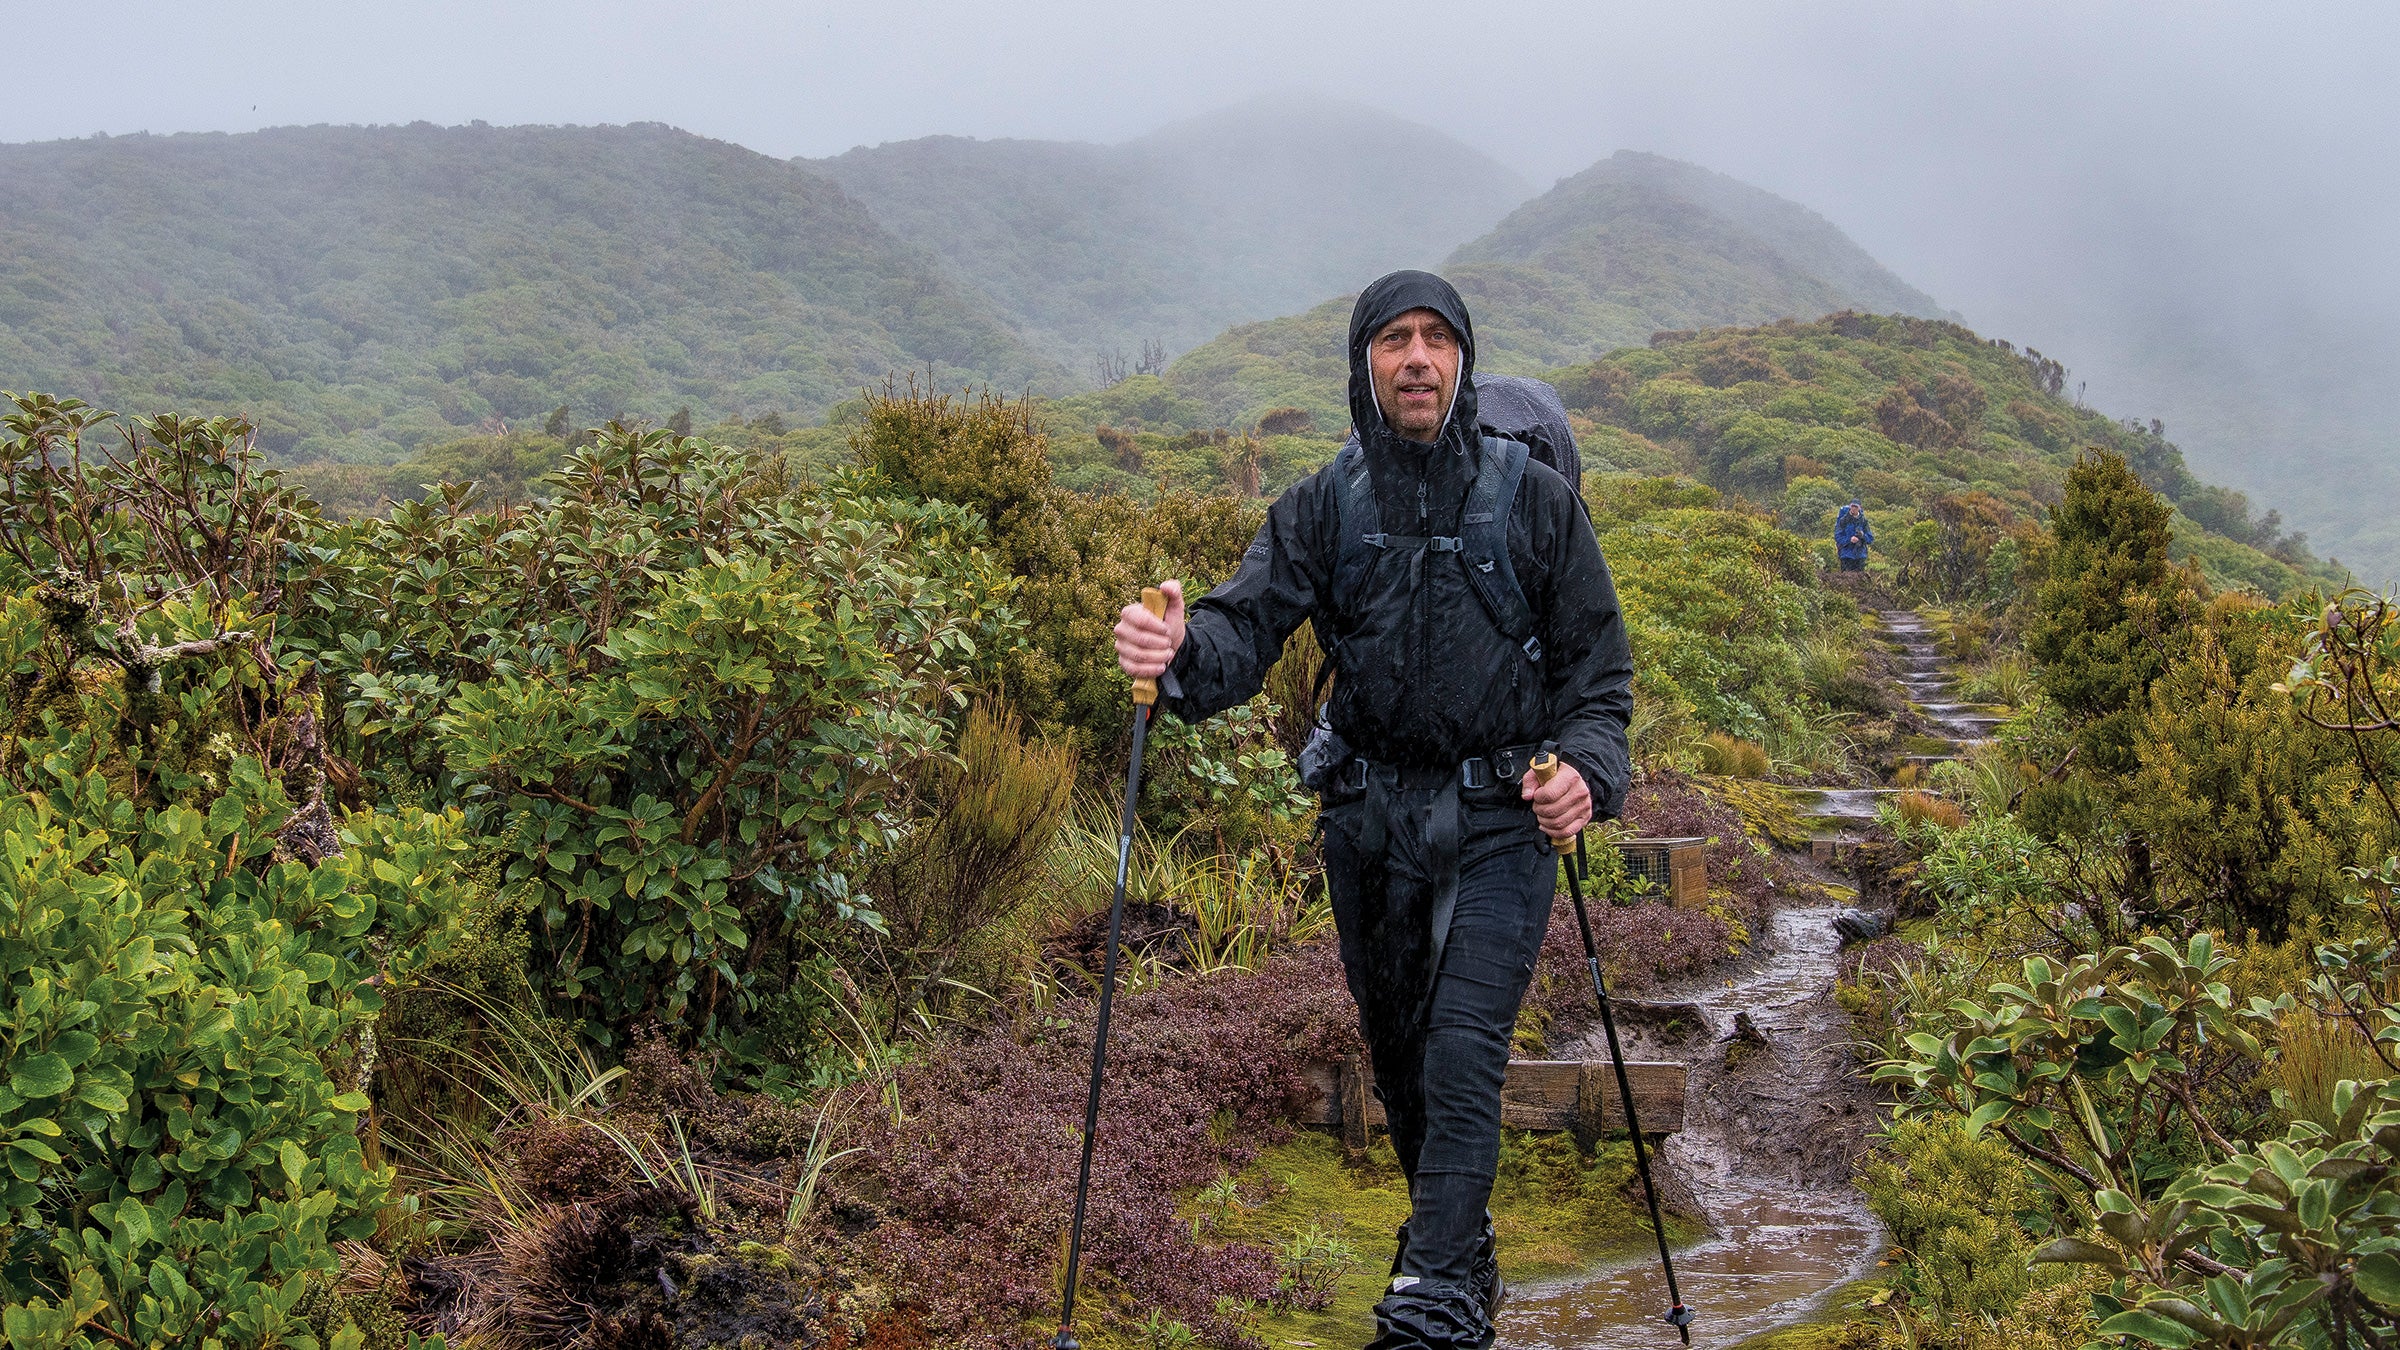 10 Tips for Hiking & Backpacking in the Rain